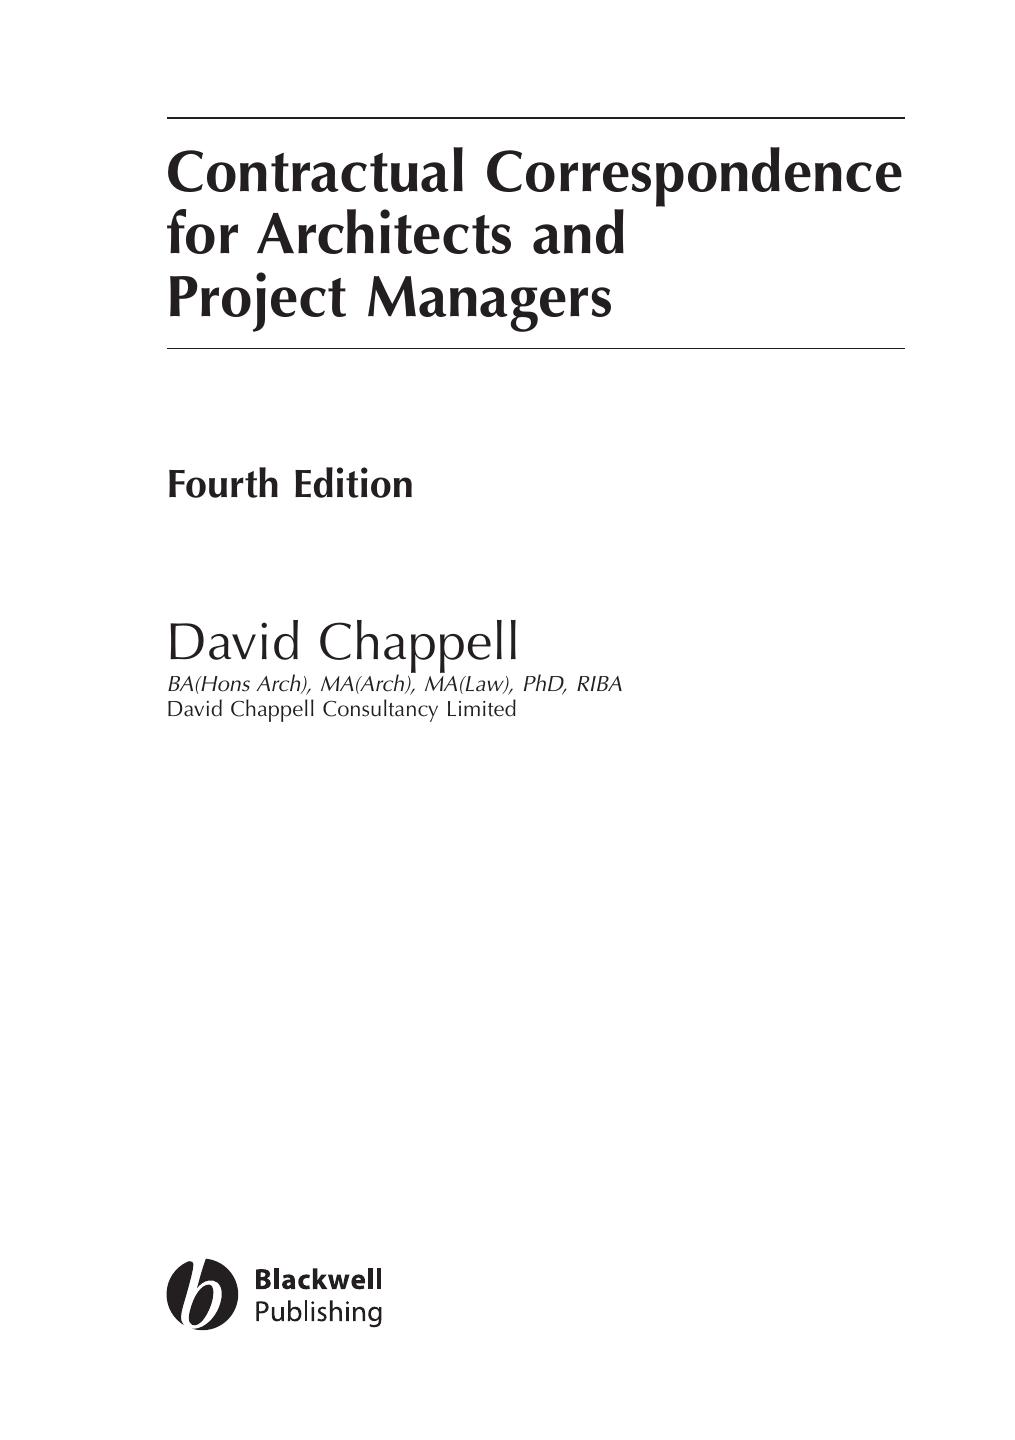 Contractual Correspondence for Architects and Project Managers 2006